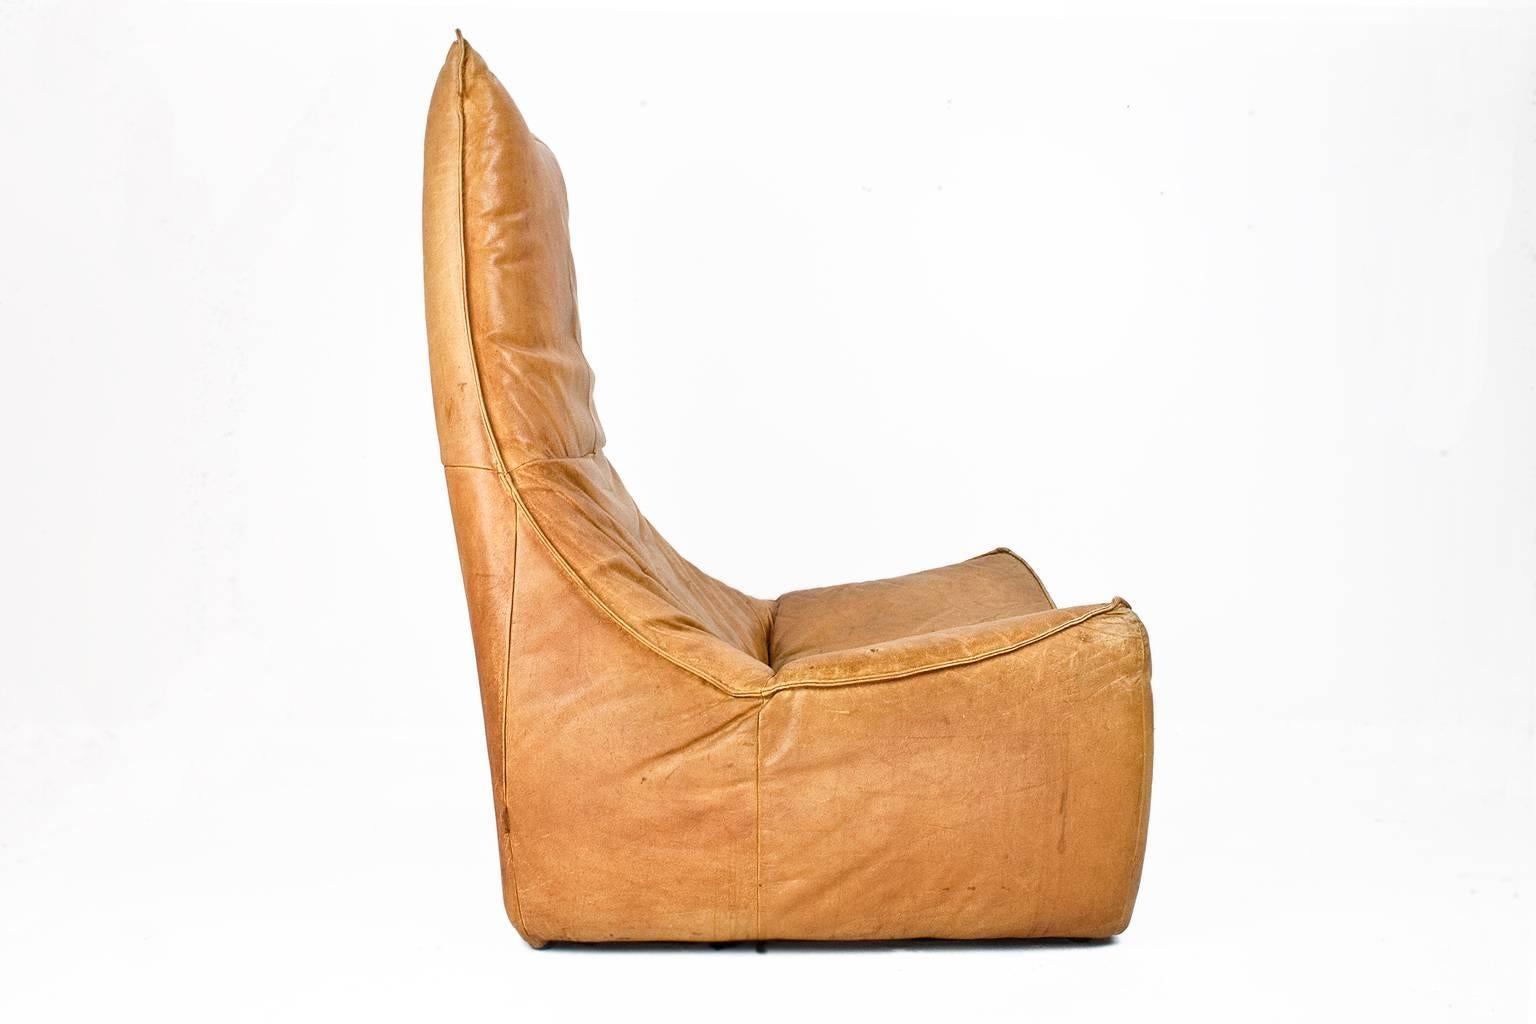 Original and beautiful lounge chair in aniline leather (the best quality leather) designed by Dutch designer Gerard Van Den Berg for label Montis in 1970. Beautiful piece of vintage design. In original condition, patina to leather conforming